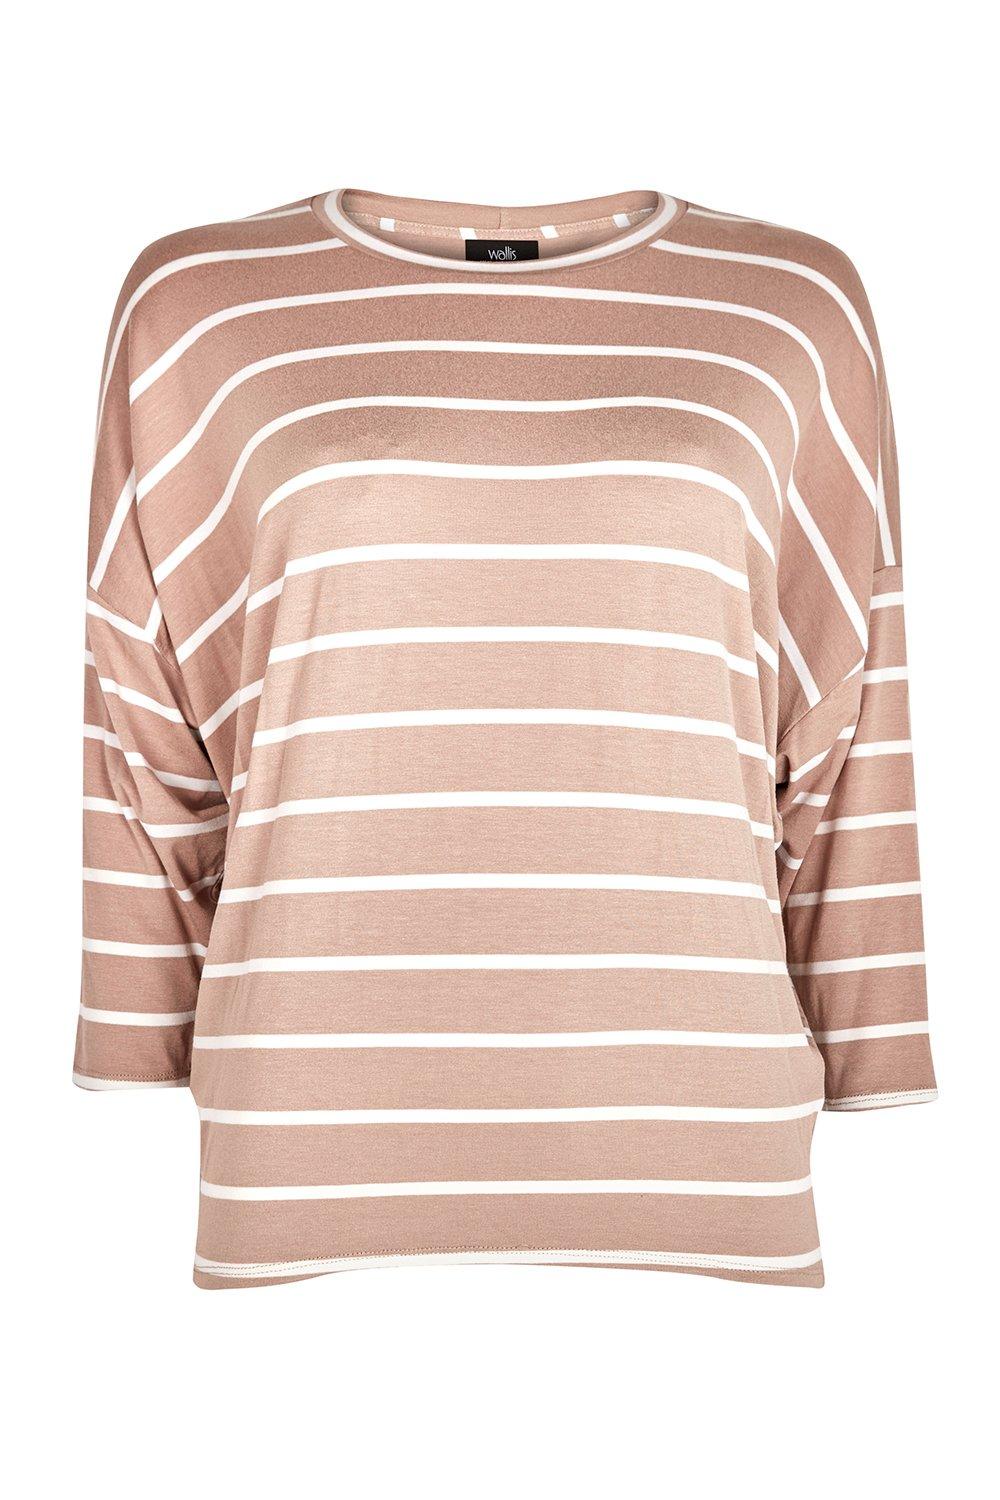 Get Timeless Style With This Striped Tee. Dropped Sleeves And Relaxed Fit Create A Contemporary Silhouette That'S Sure To Flatter, Whilst Chic Neutral And White Tones Mean This Is Easy To Pair. Wear With Jeans And Trainers For Easy Everyday Style. Tall To